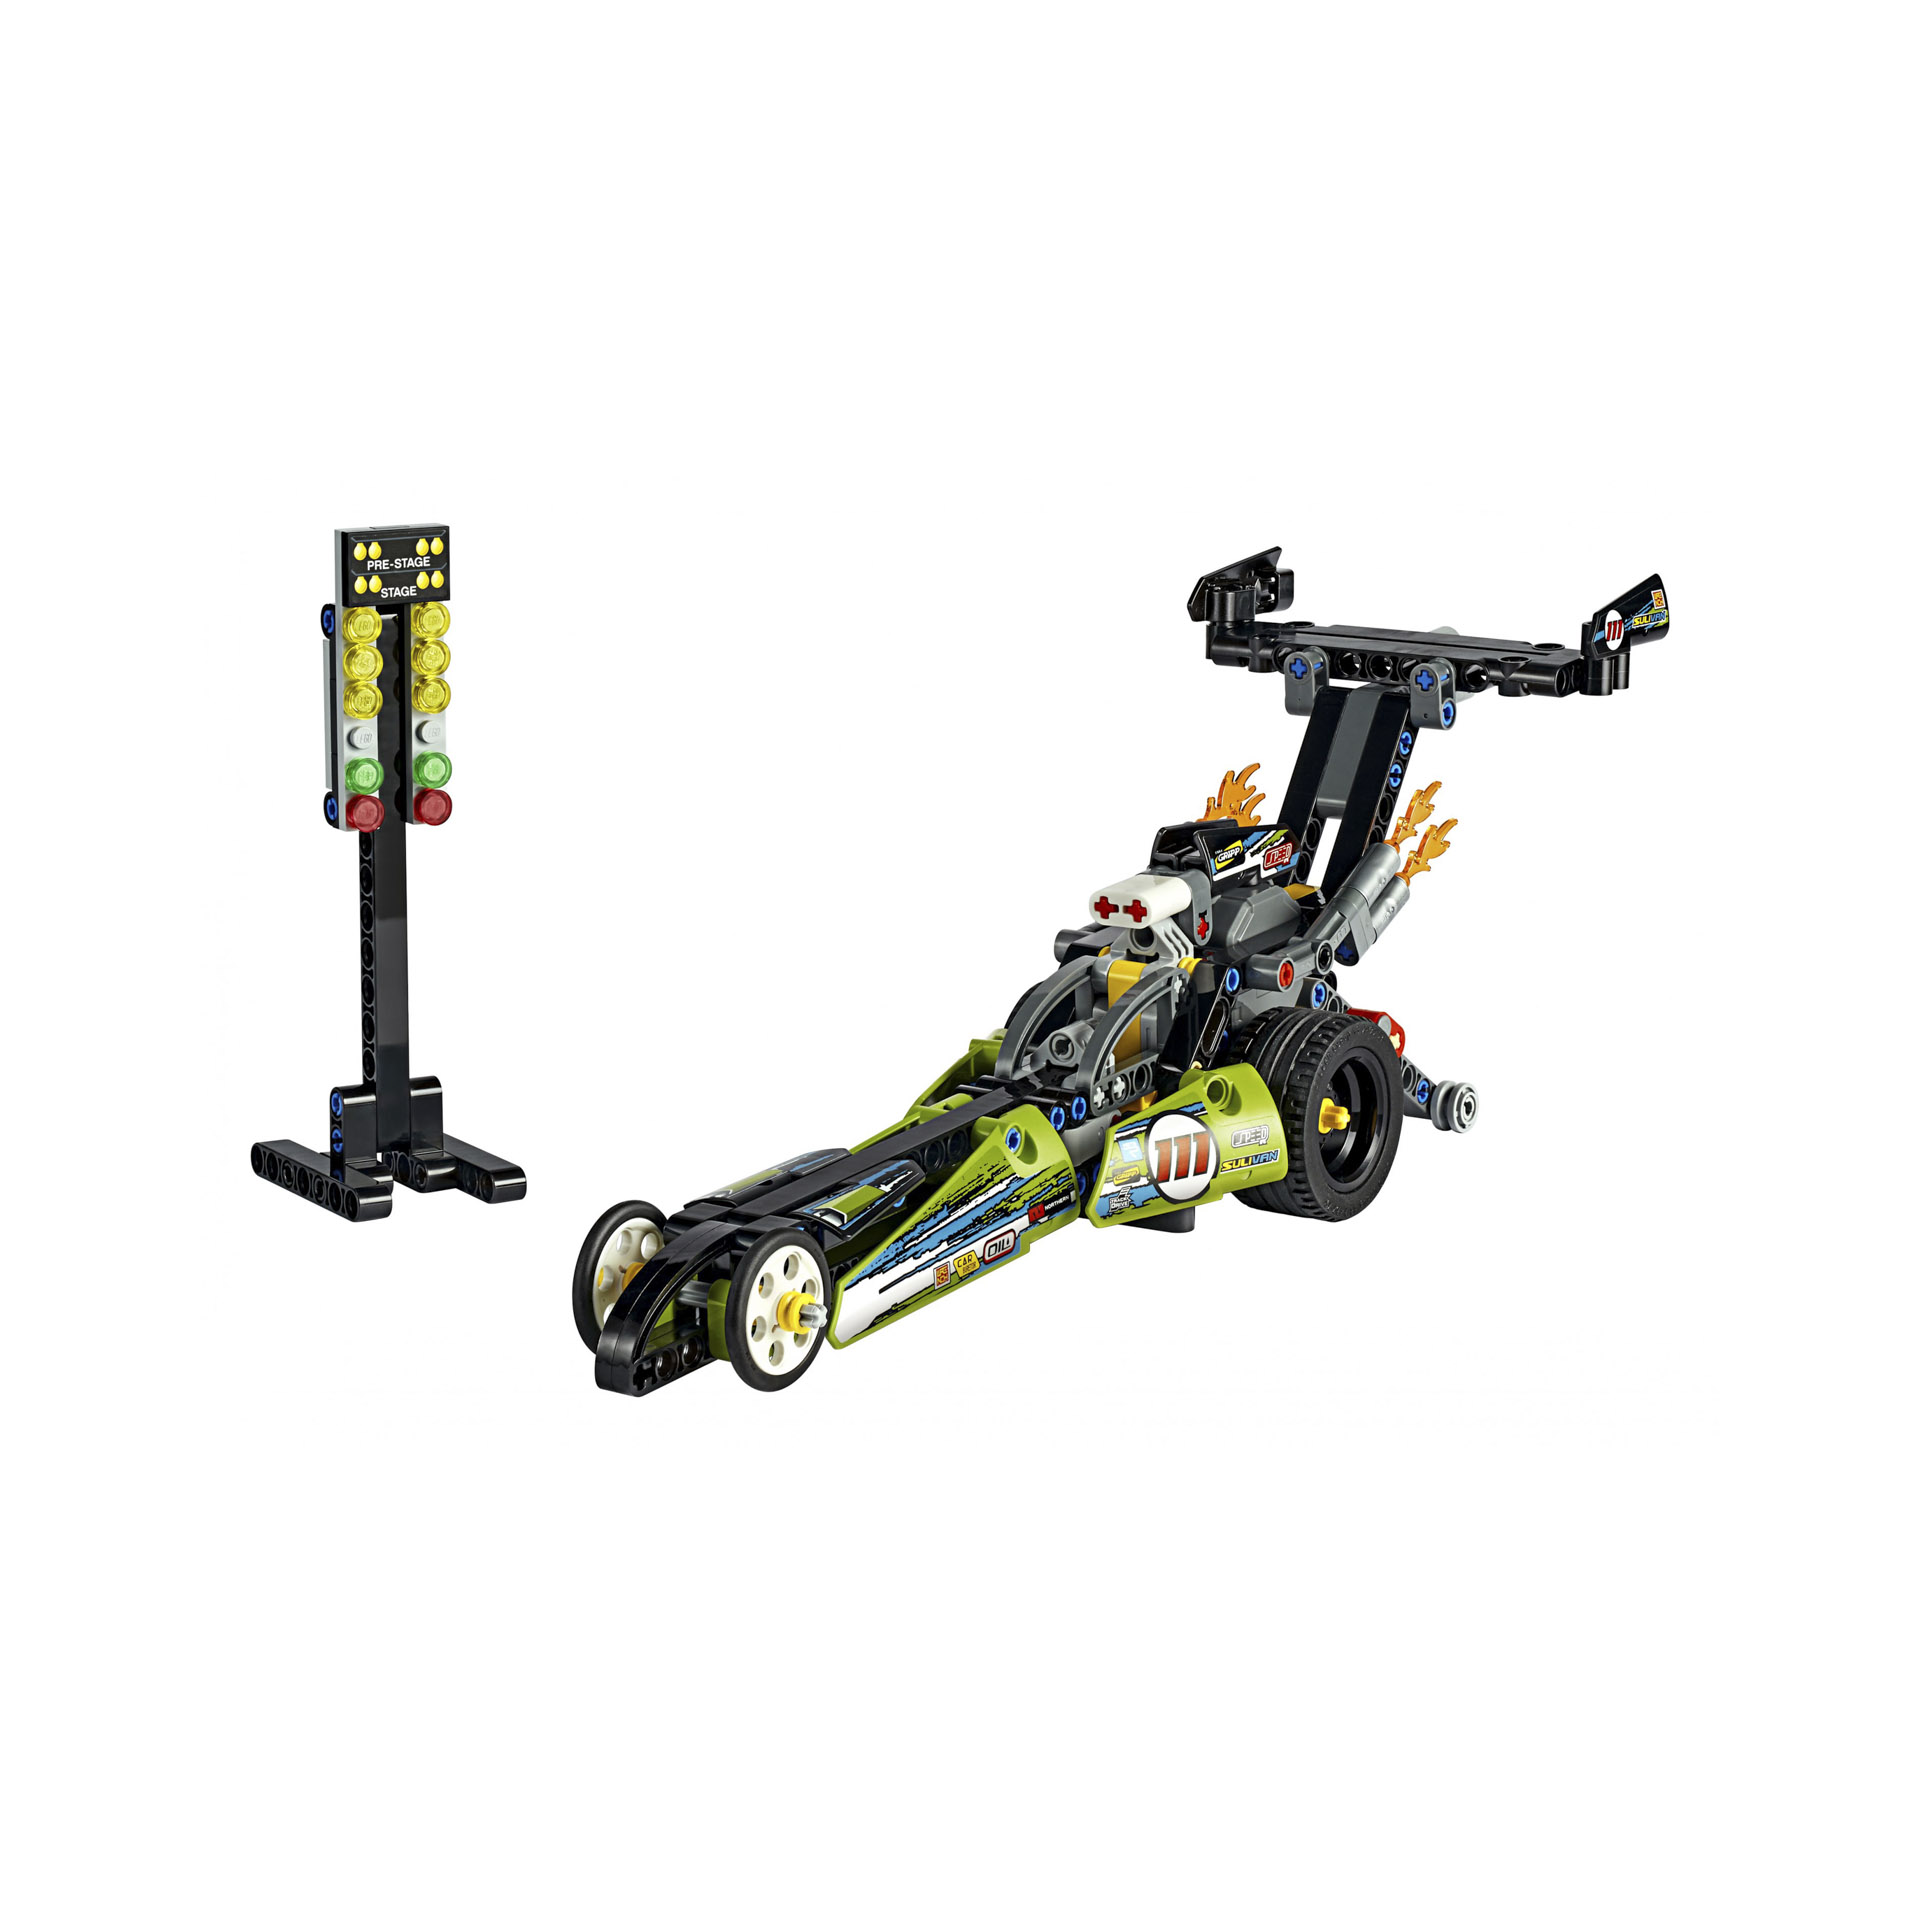 Dragster 42103, , large